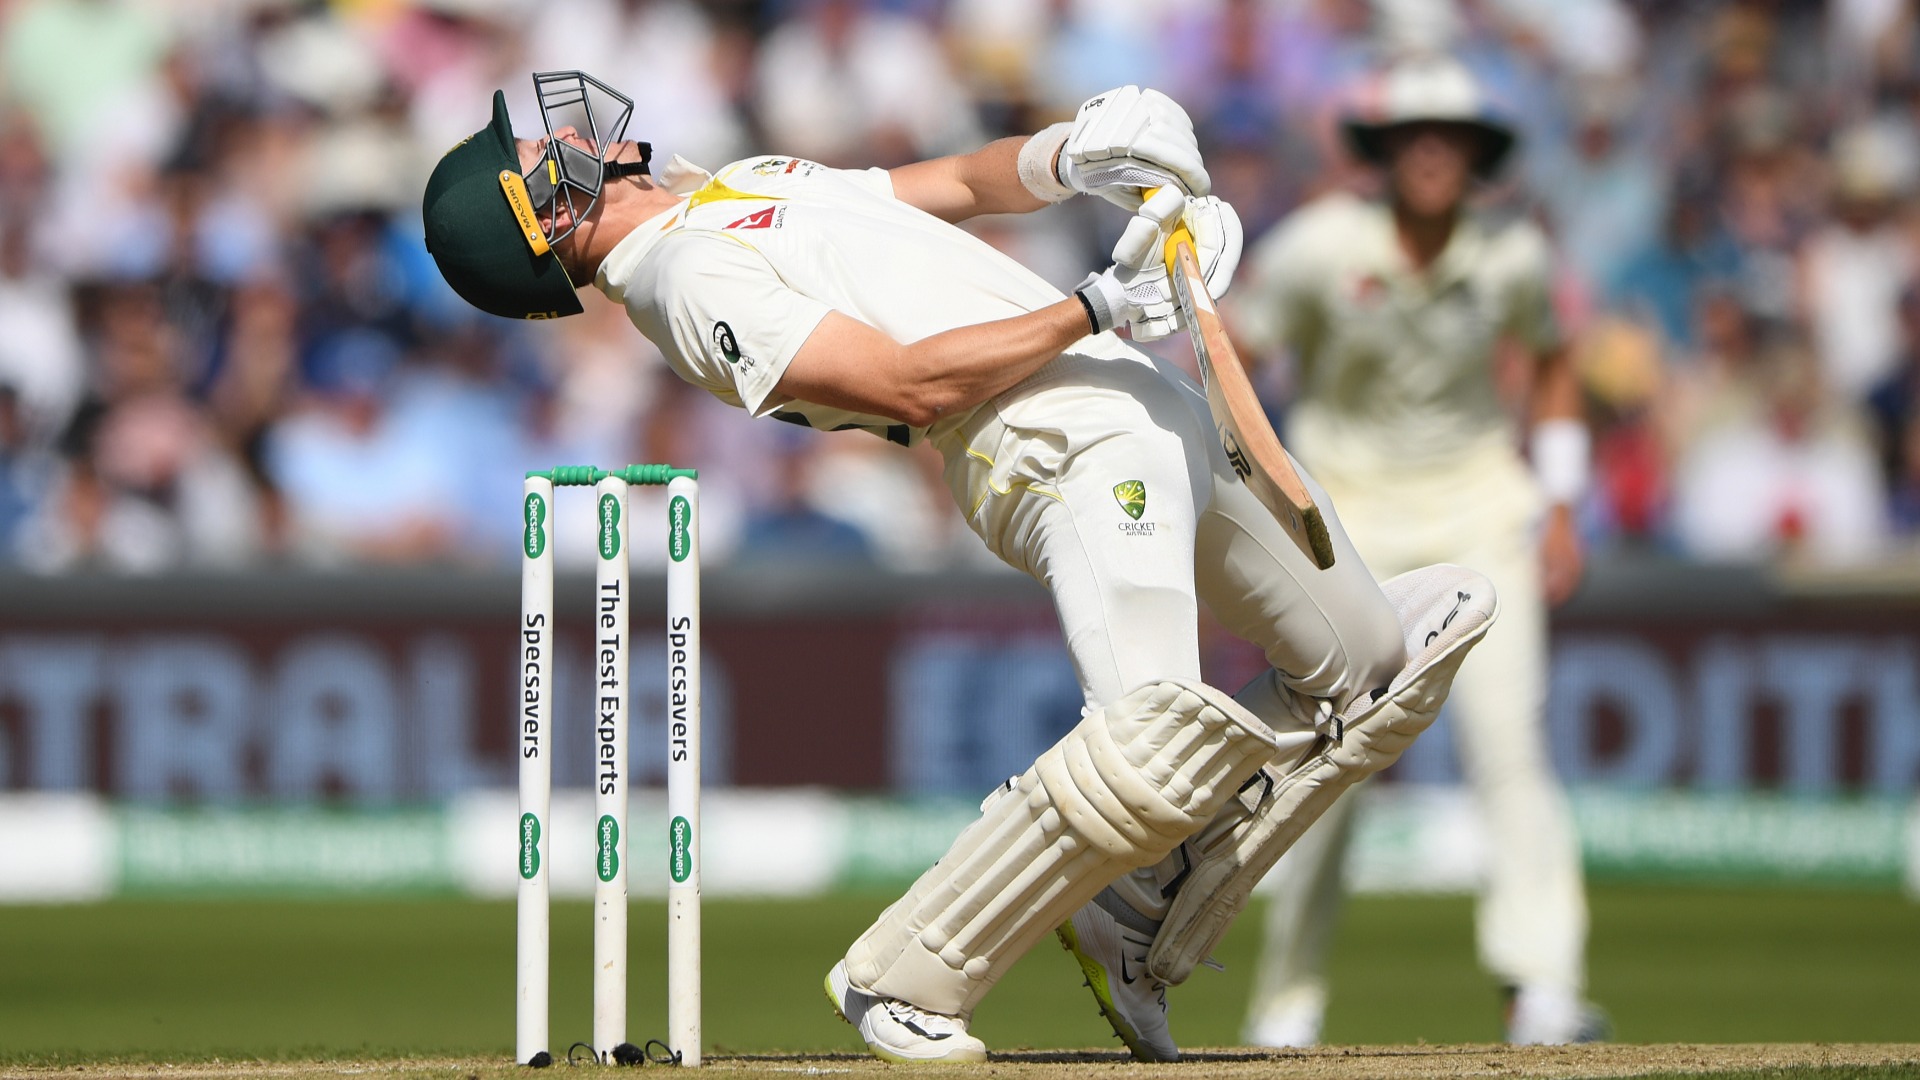 Marnus Labuschagne is gaining an increasing familiarity with the questions in concussion tests after taking another blow at Headingley.